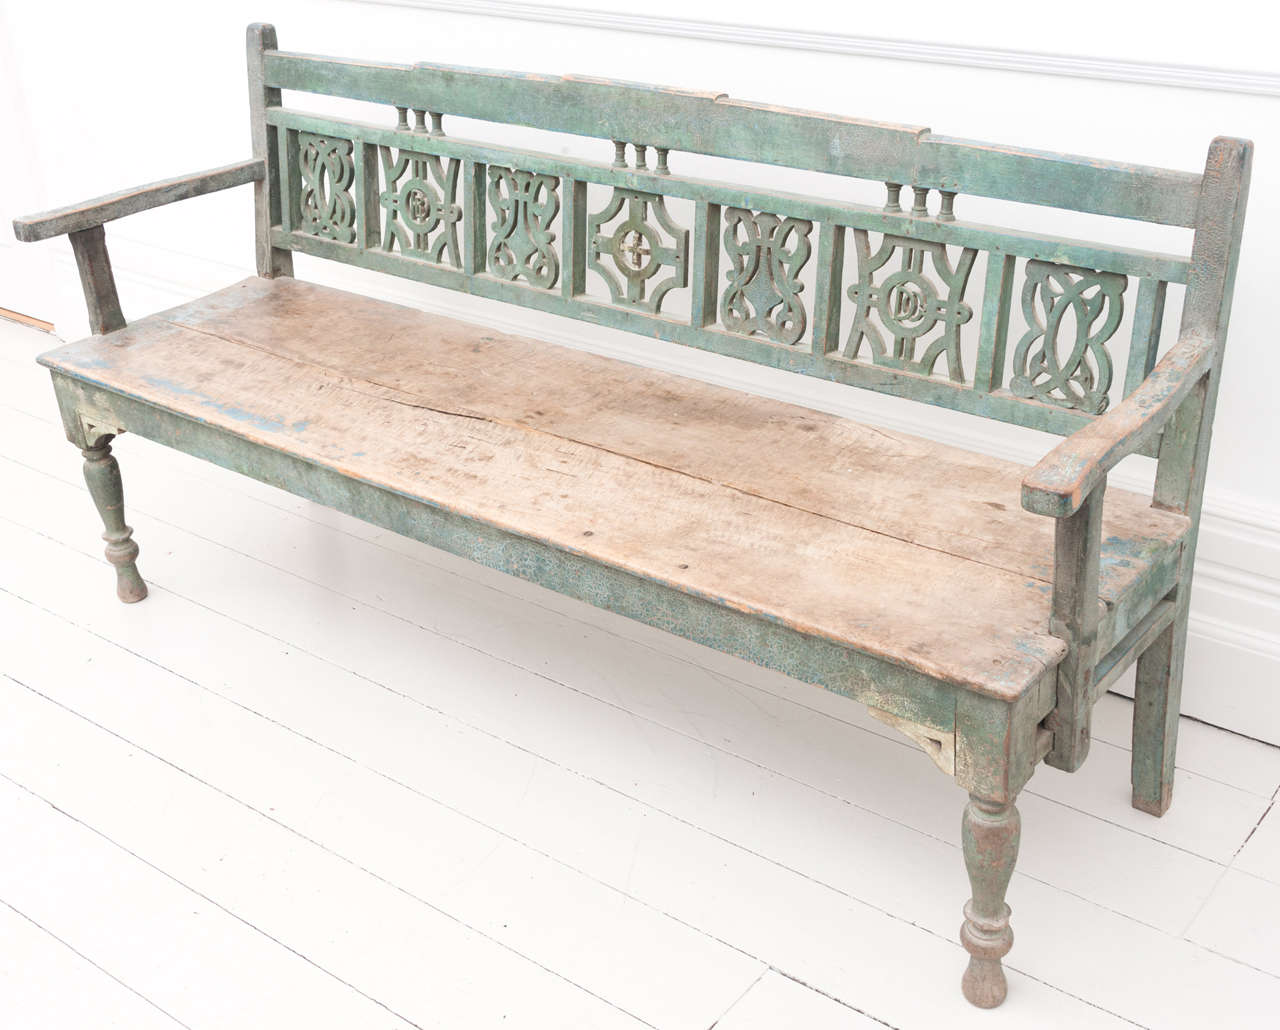 A very decorative and rare sycamore marriage settle bench, with the initials of a couple carved on either side in the back of the piece.  It retains its original blue, green paint and is highly stylised with its open carved back panels and overall